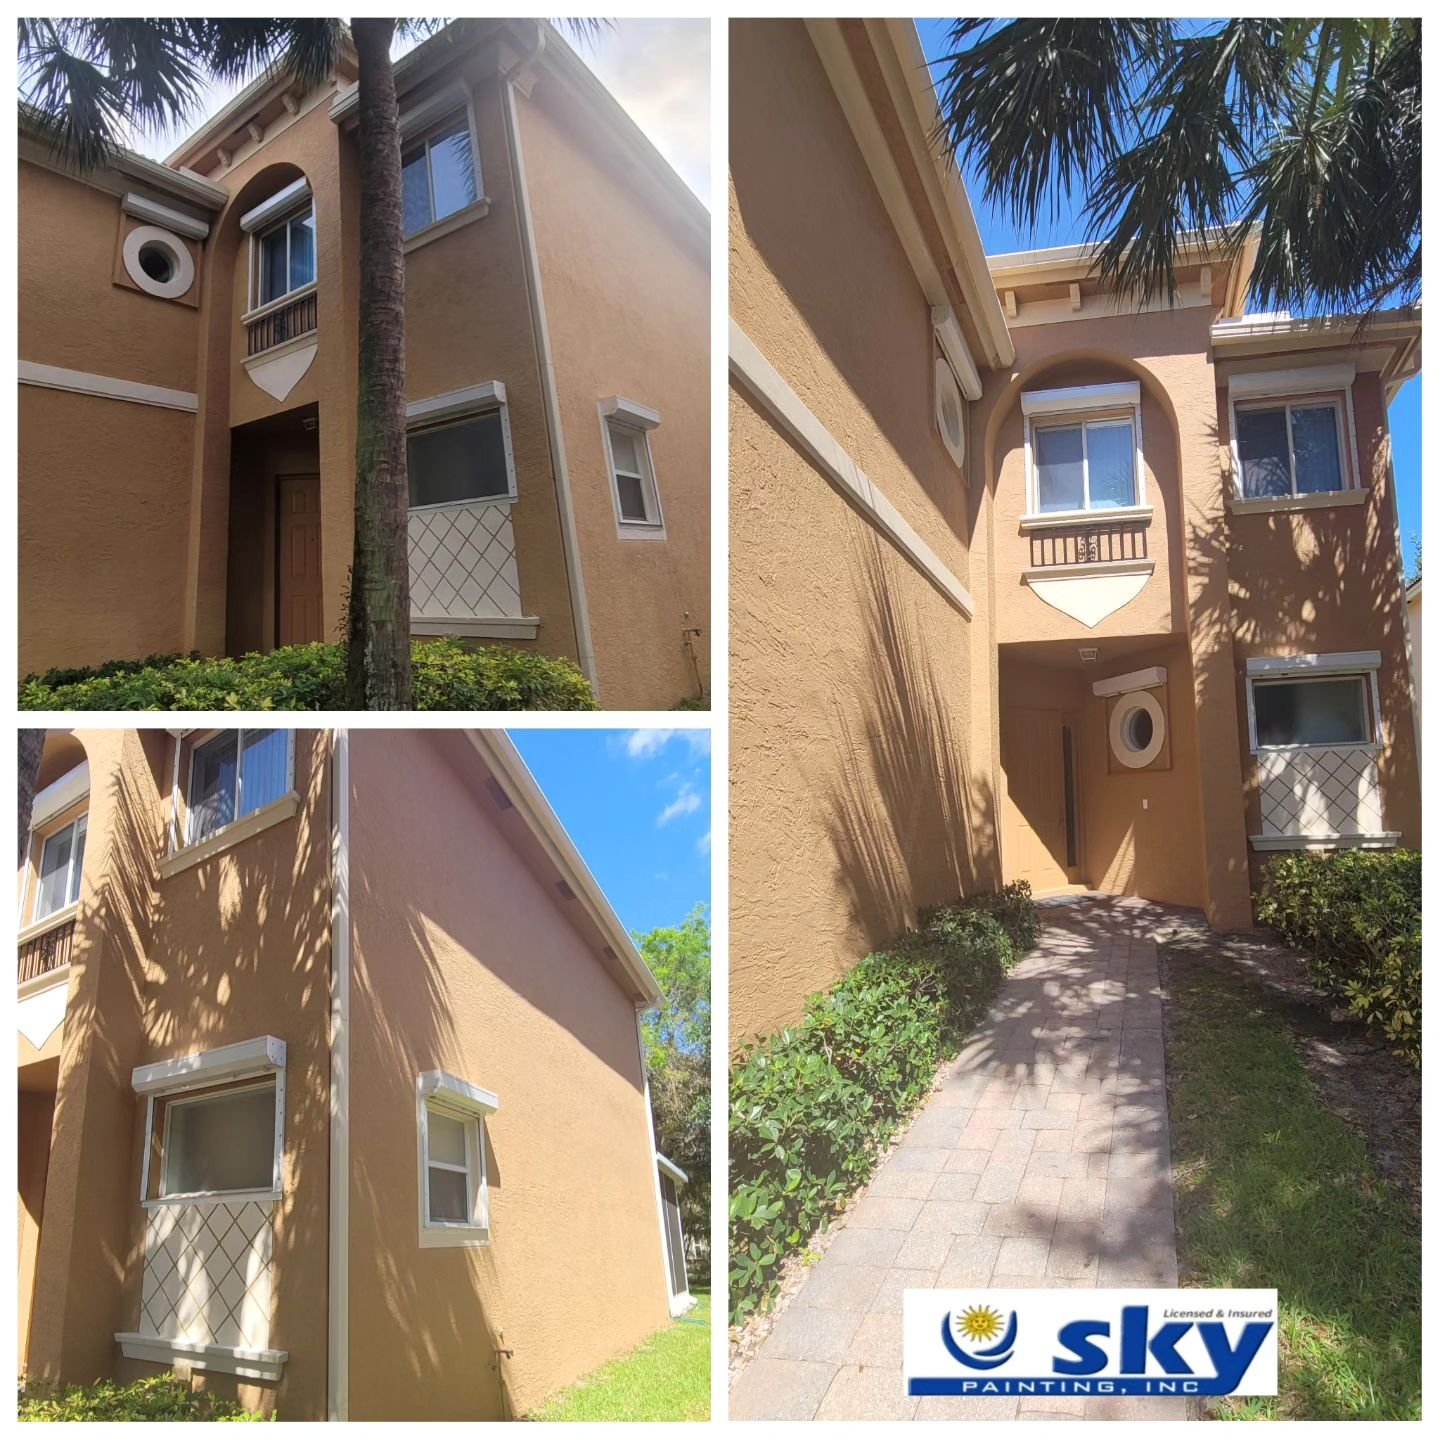 Transform your home with our interior painting and exterior services! At Sky Painting Inc., we specialize in bringing your spaces to life, highlighting their beauty and unique style. With our meticulous attention to detail and passion for the art of 